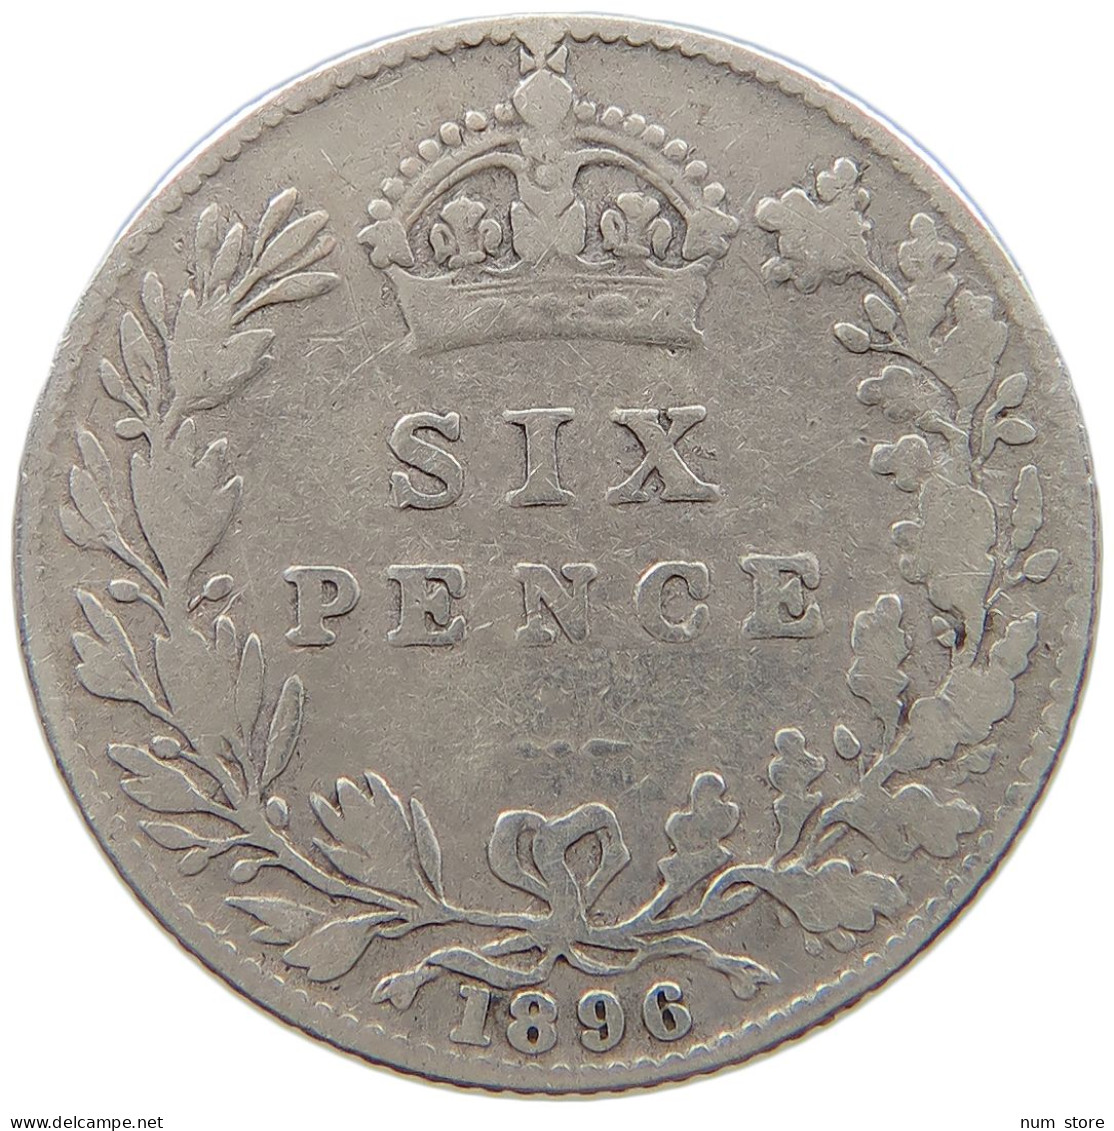 GREAT BRITAIN SIXPENCE 1896 Victoria 1837-1901 #t158 0387 - H. 6 Pence